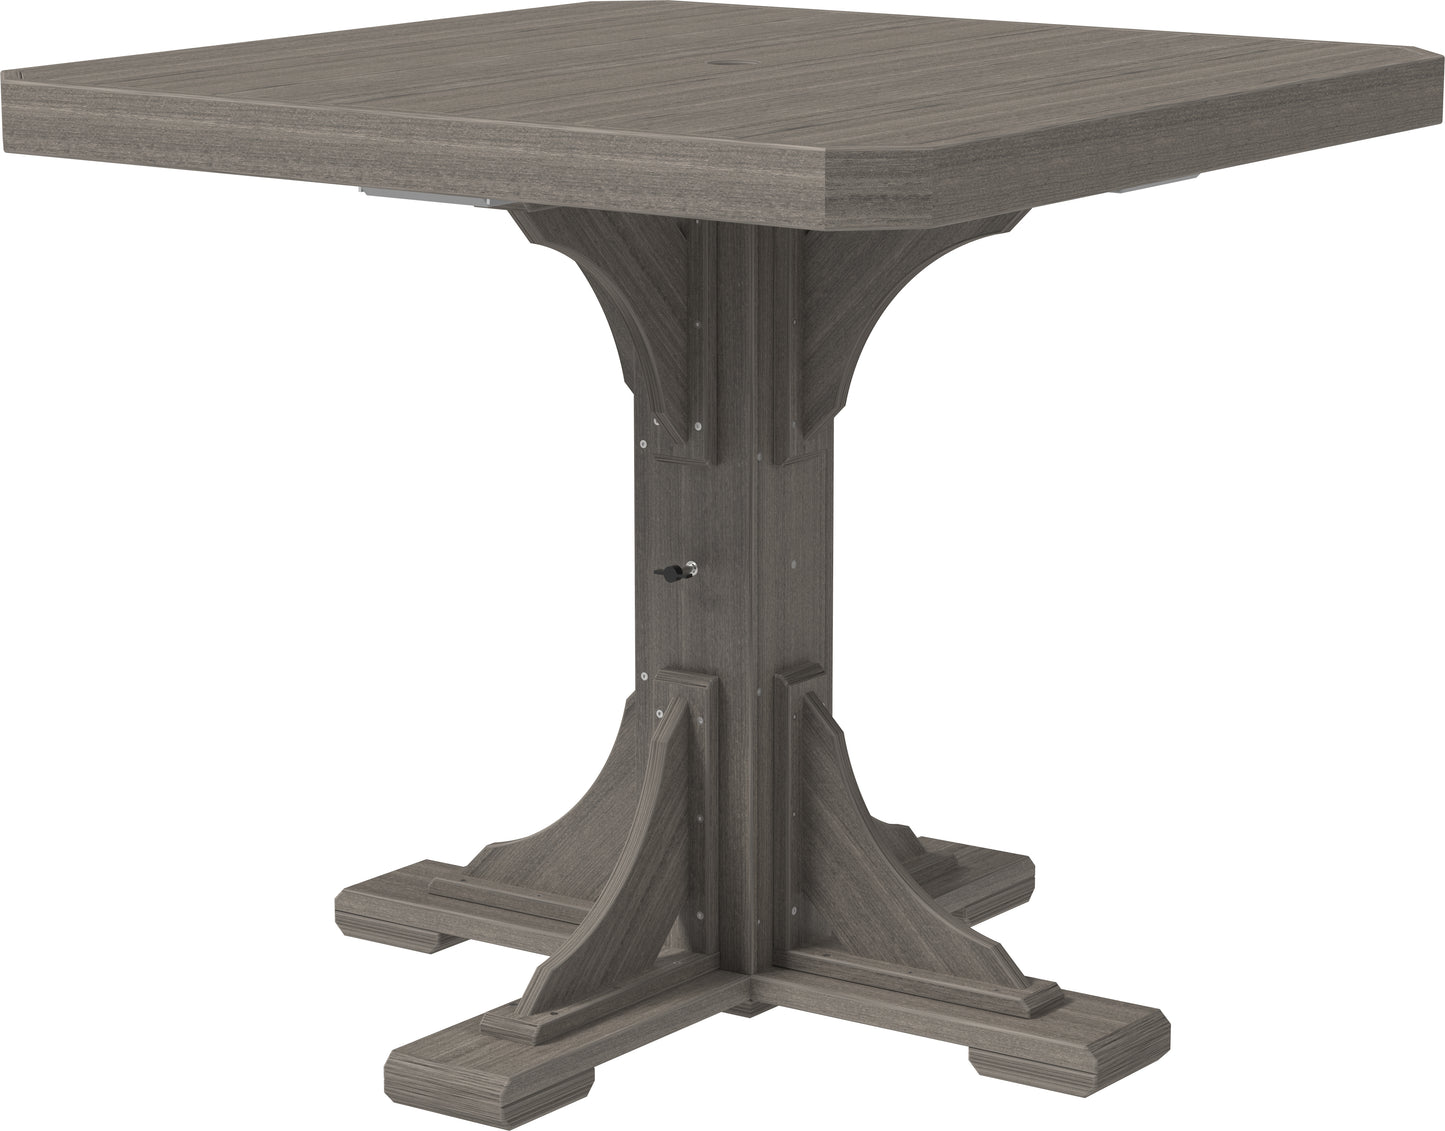 LuxCraft Recycled Plastic 41" Counter Height Square Table - LEAD TIME TO SHIP 3 TO 4 WEEKS